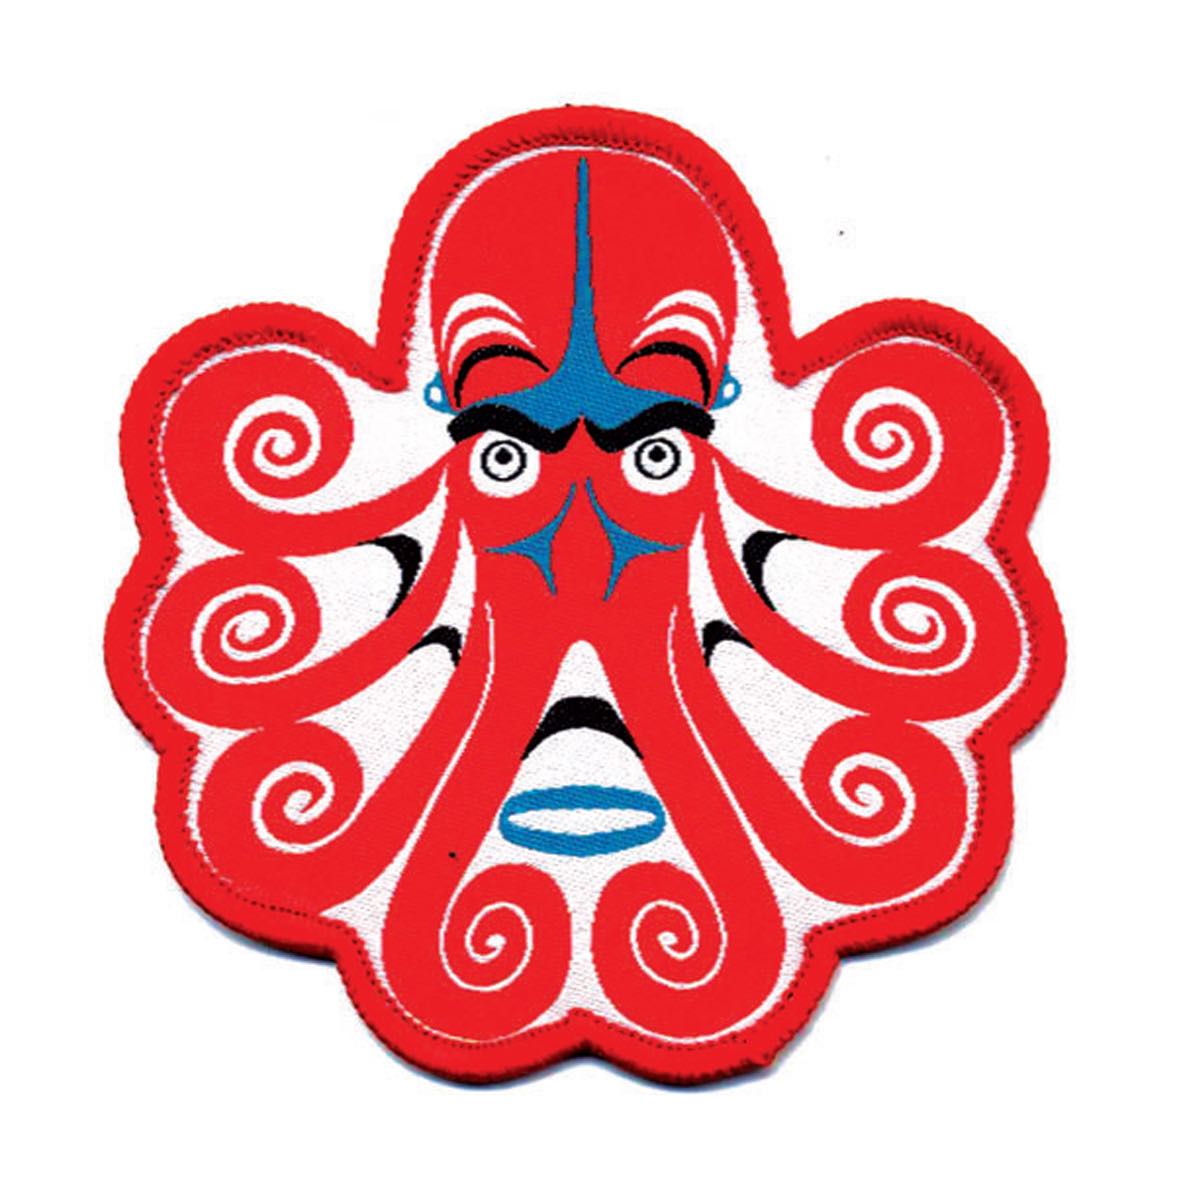 Patch Octopus - Patch Octopus -  - House of Himwitsa Native Art Gallery and Gifts